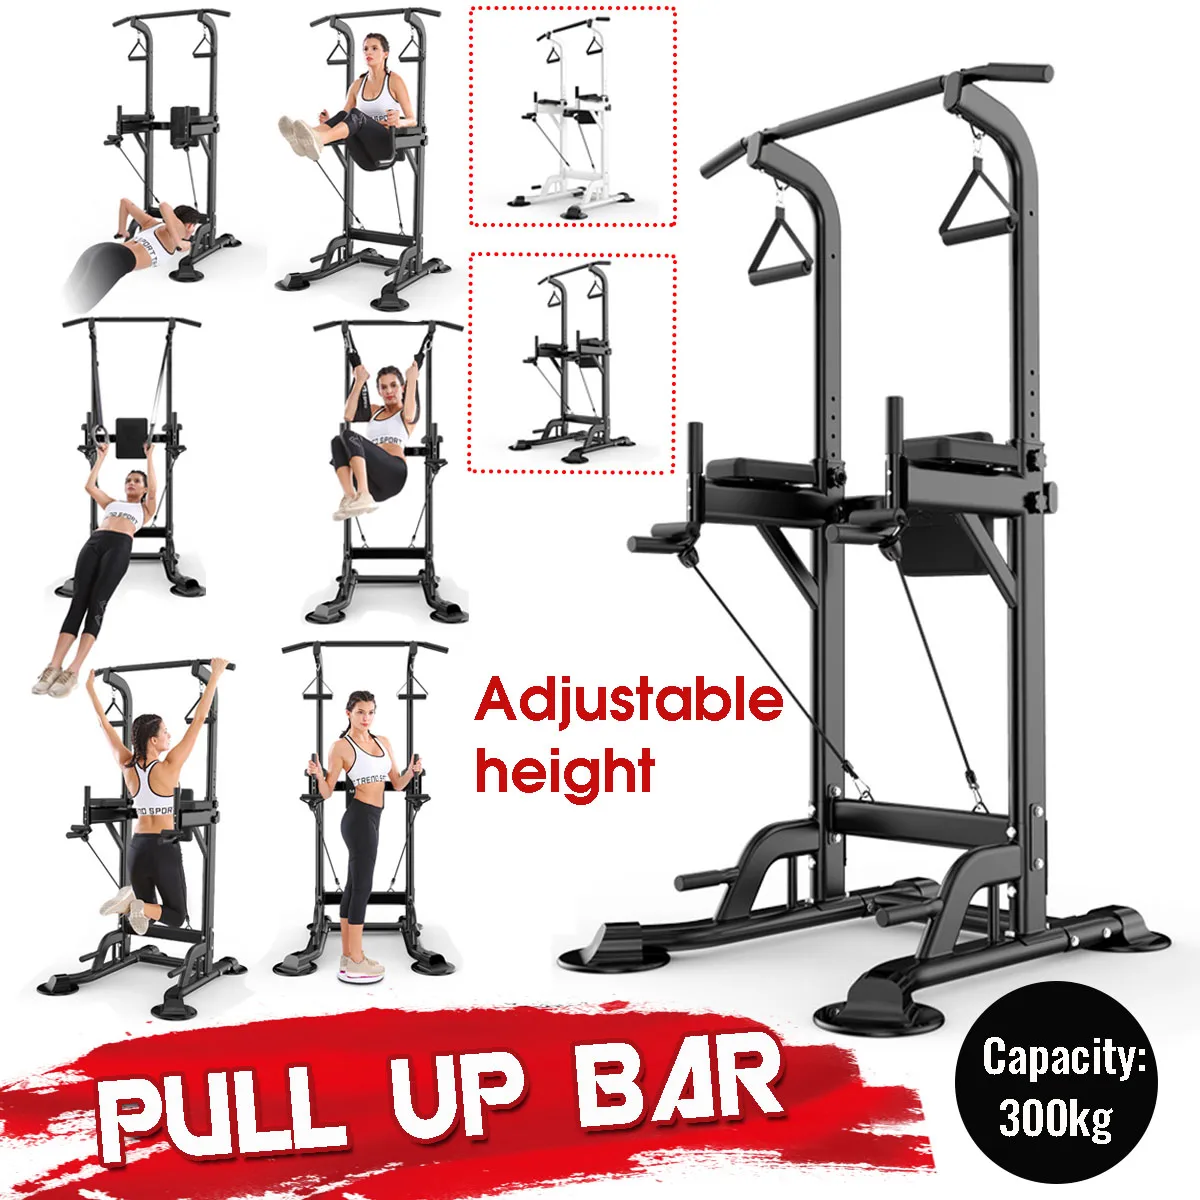 Permalink to Multifunctional Fitness Station Pull-Up Push-Up Bars Adjustable Height Gym Exercise Body Fitness Strength Training Equipment